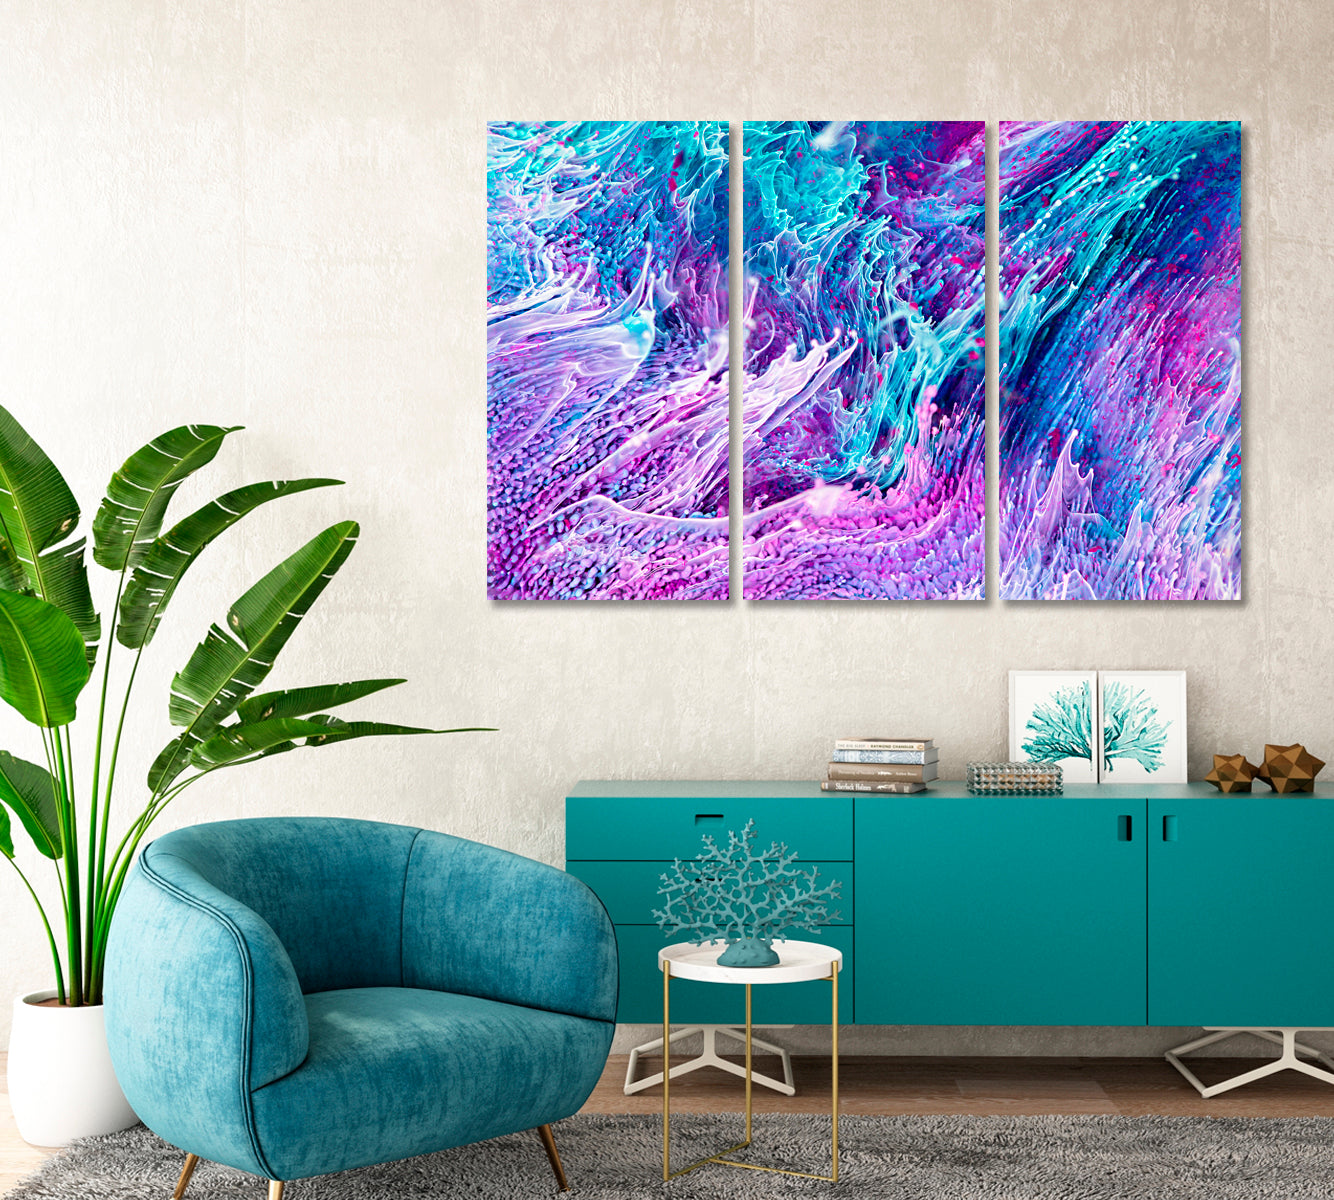 Beautiful Mixed Turquoise and Purple Liquid Splashes and Ripple Canvas Print-Canvas Print-CetArt-1 Panel-24x16 inches-CetArt